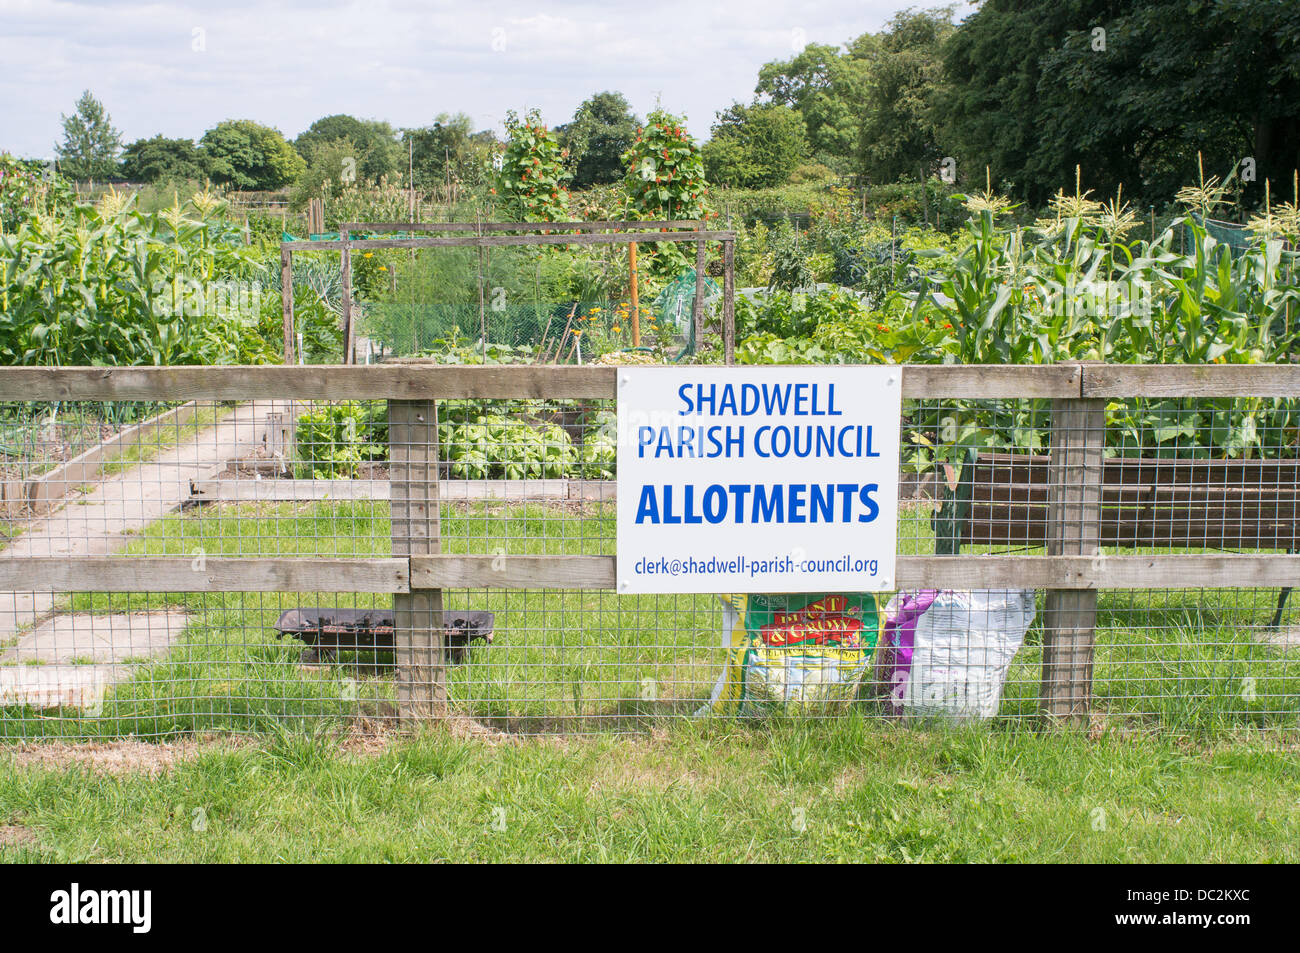 Sign outside Shadwell Parish Council Allotment gardens, Yorkshire, England, UK Stock Photo